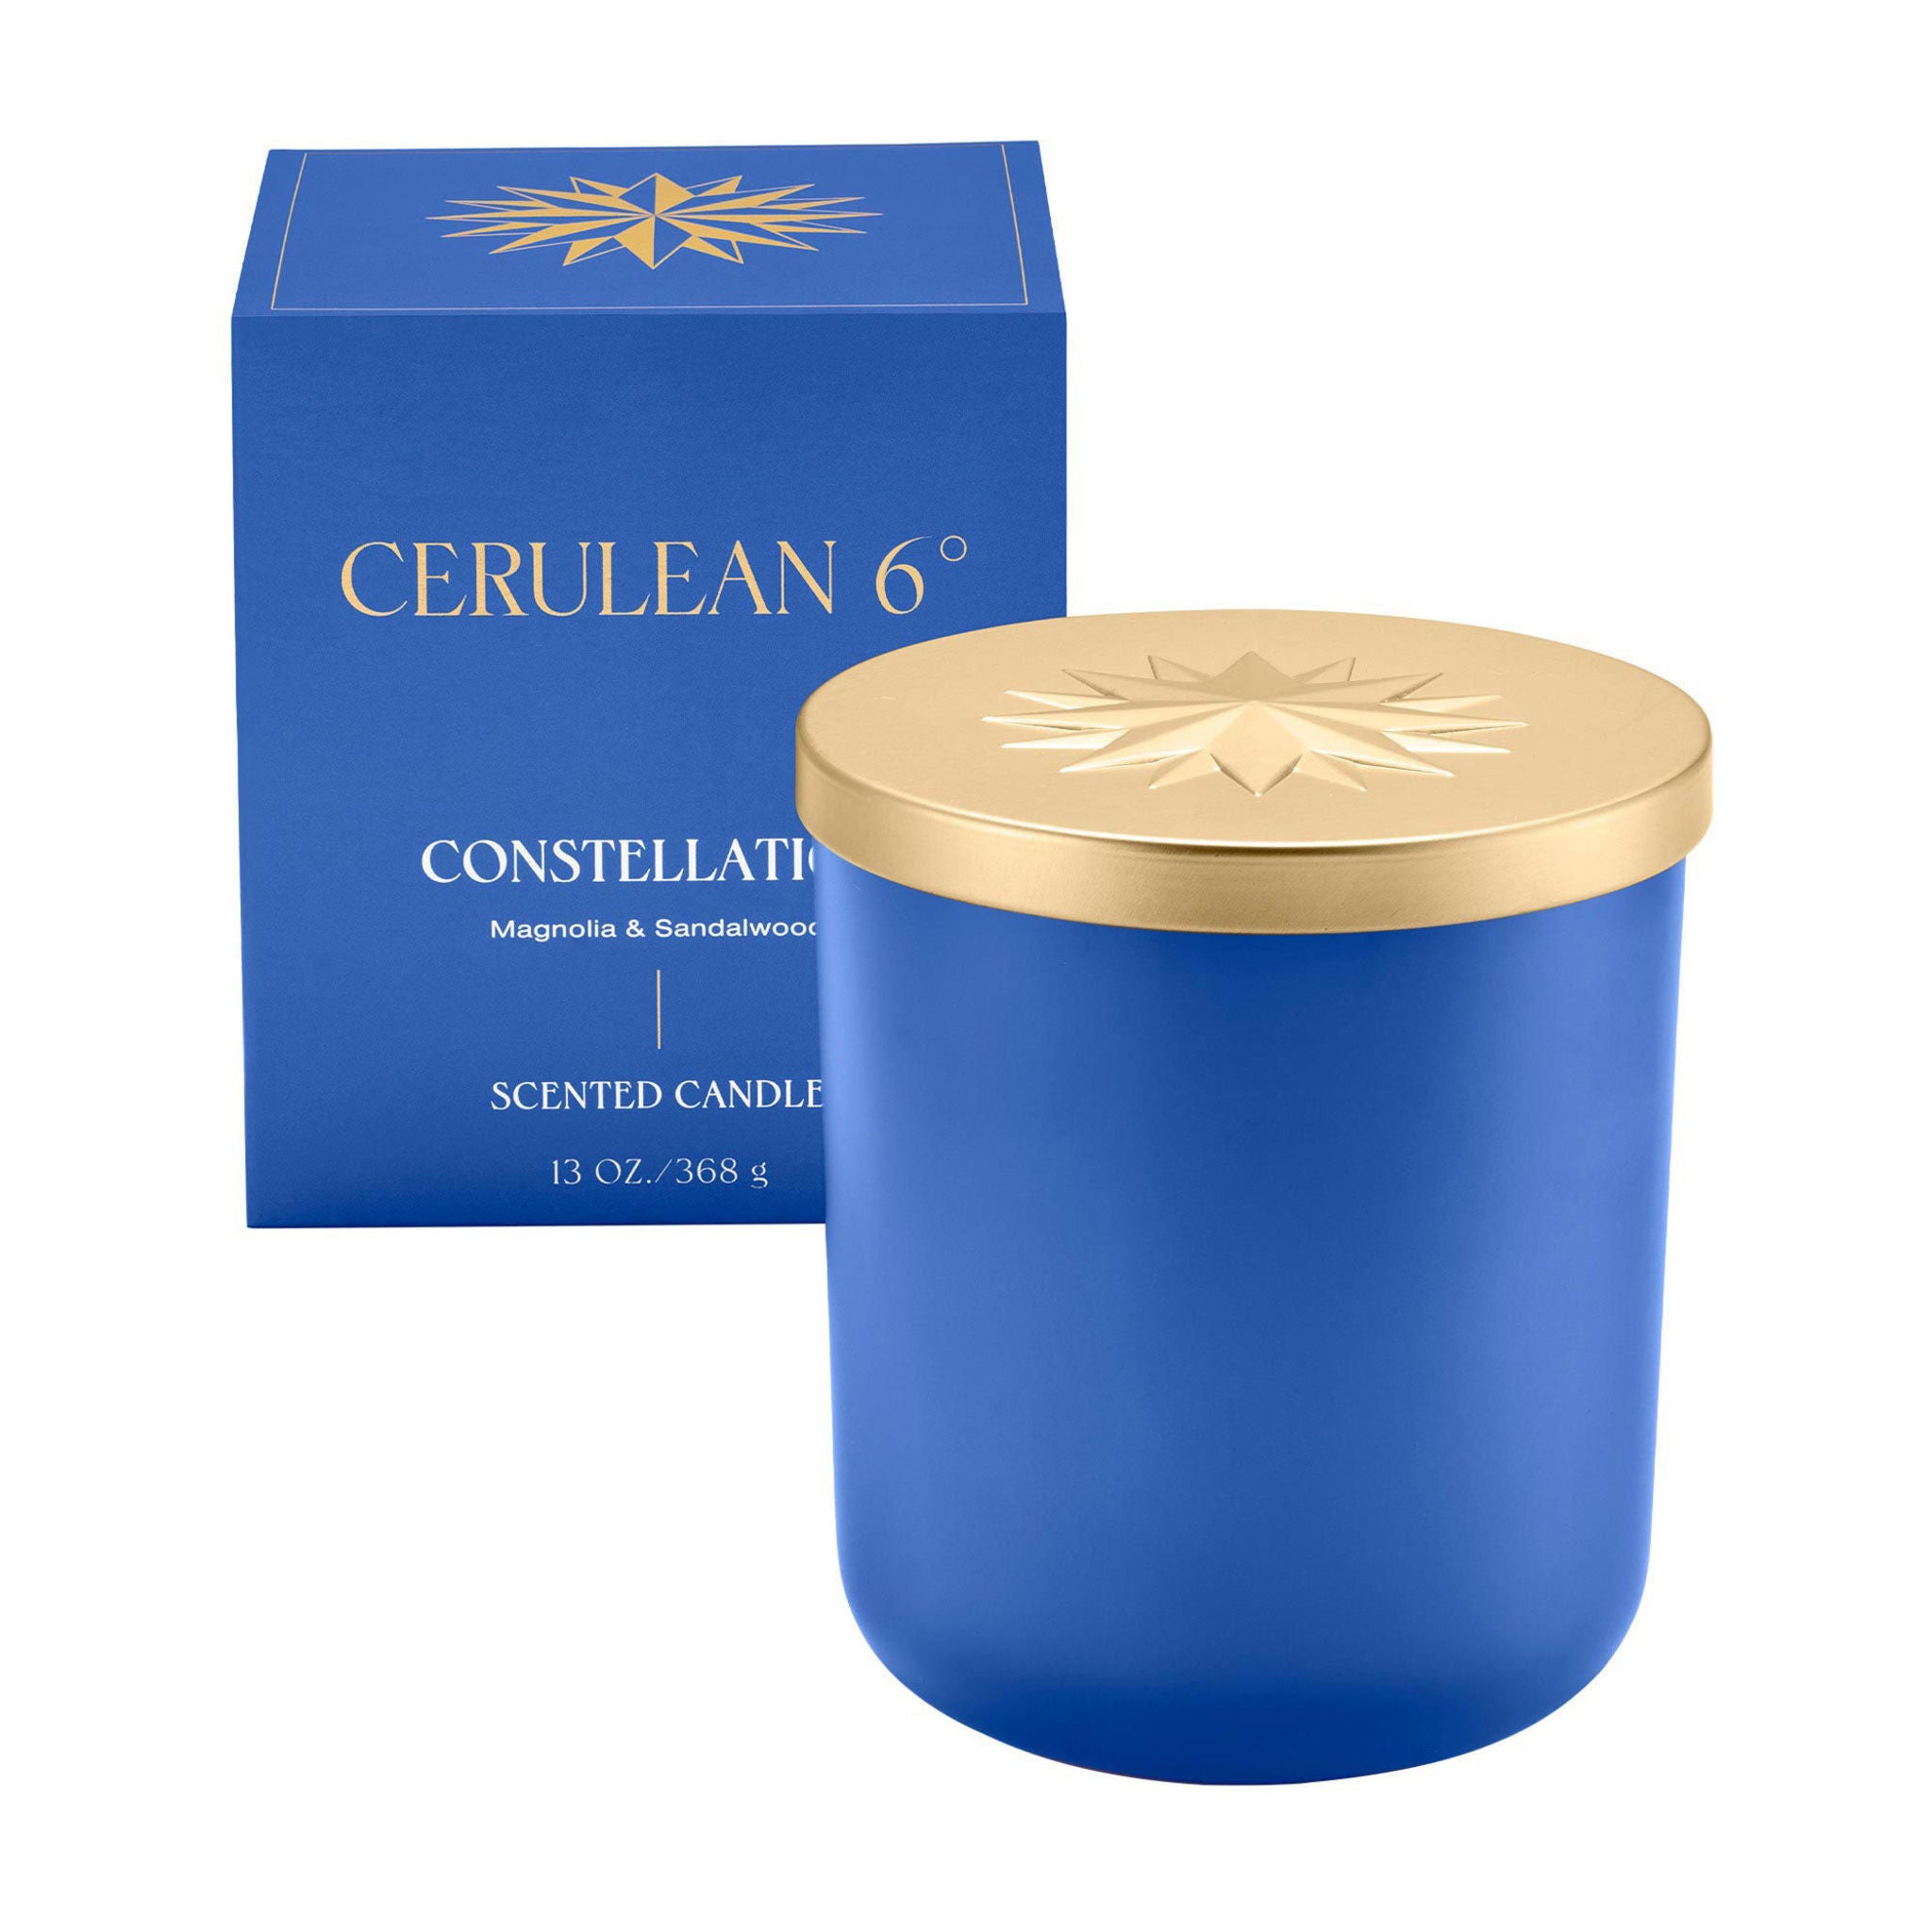 Cerulean 6 Constellation Luxury Candle Size variant: 13 oz main image.